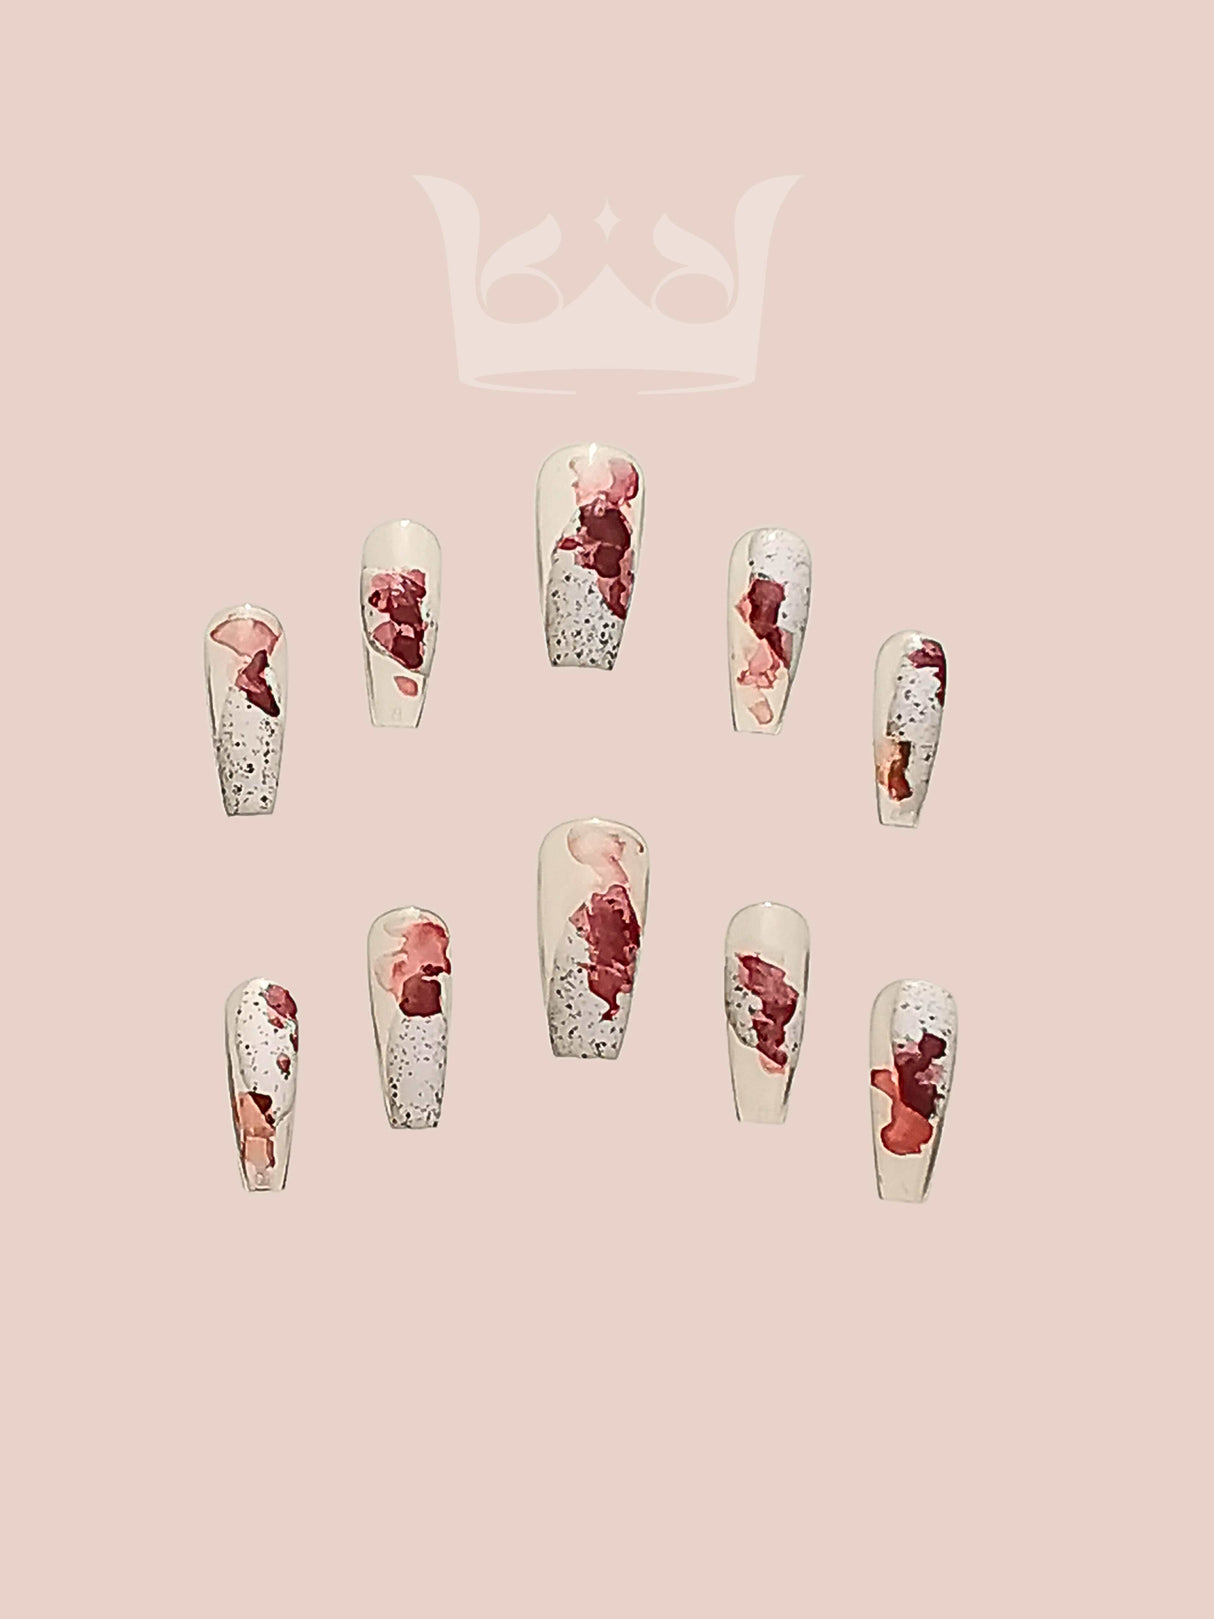 These press-on nails feature abstract or marble-like patterns, predominantly in shades of red and white, with some gold accents. The nails are long and have a coffin or ballerina shape